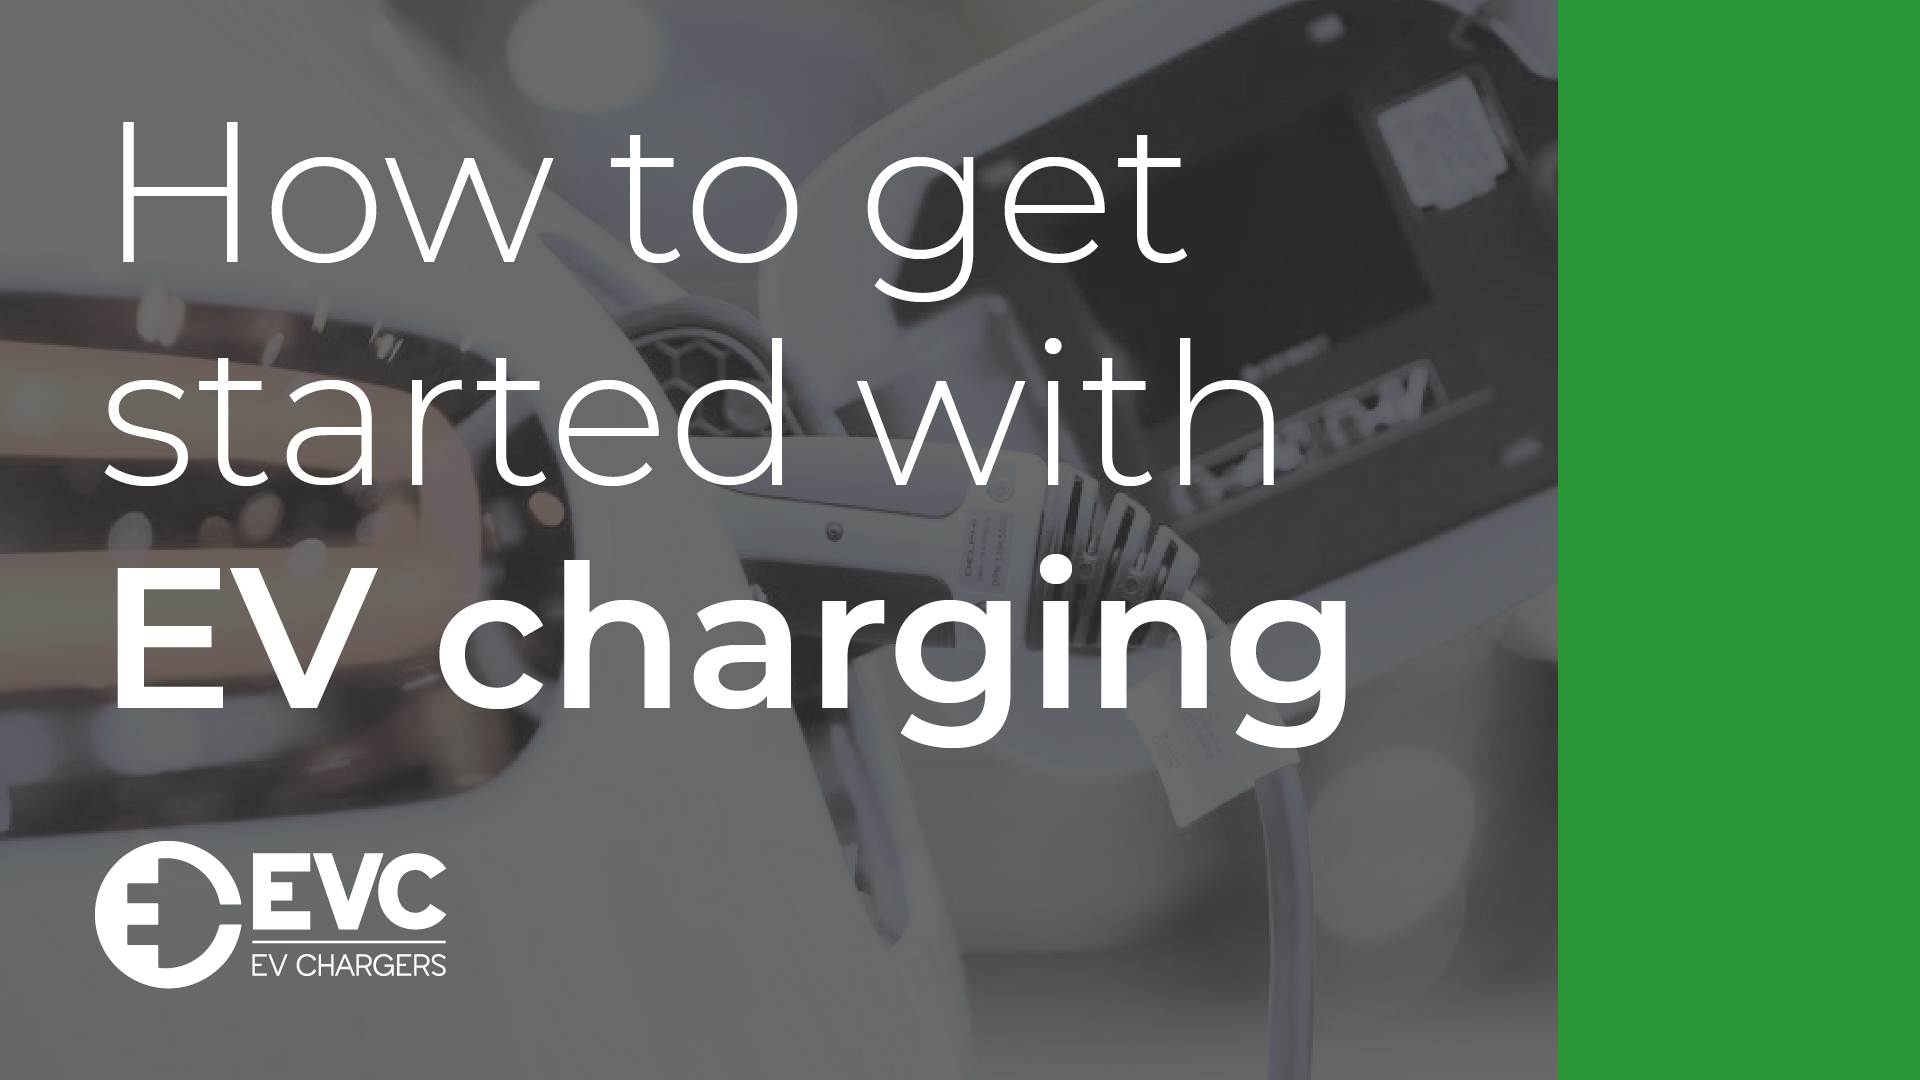 How to get started with EV charging